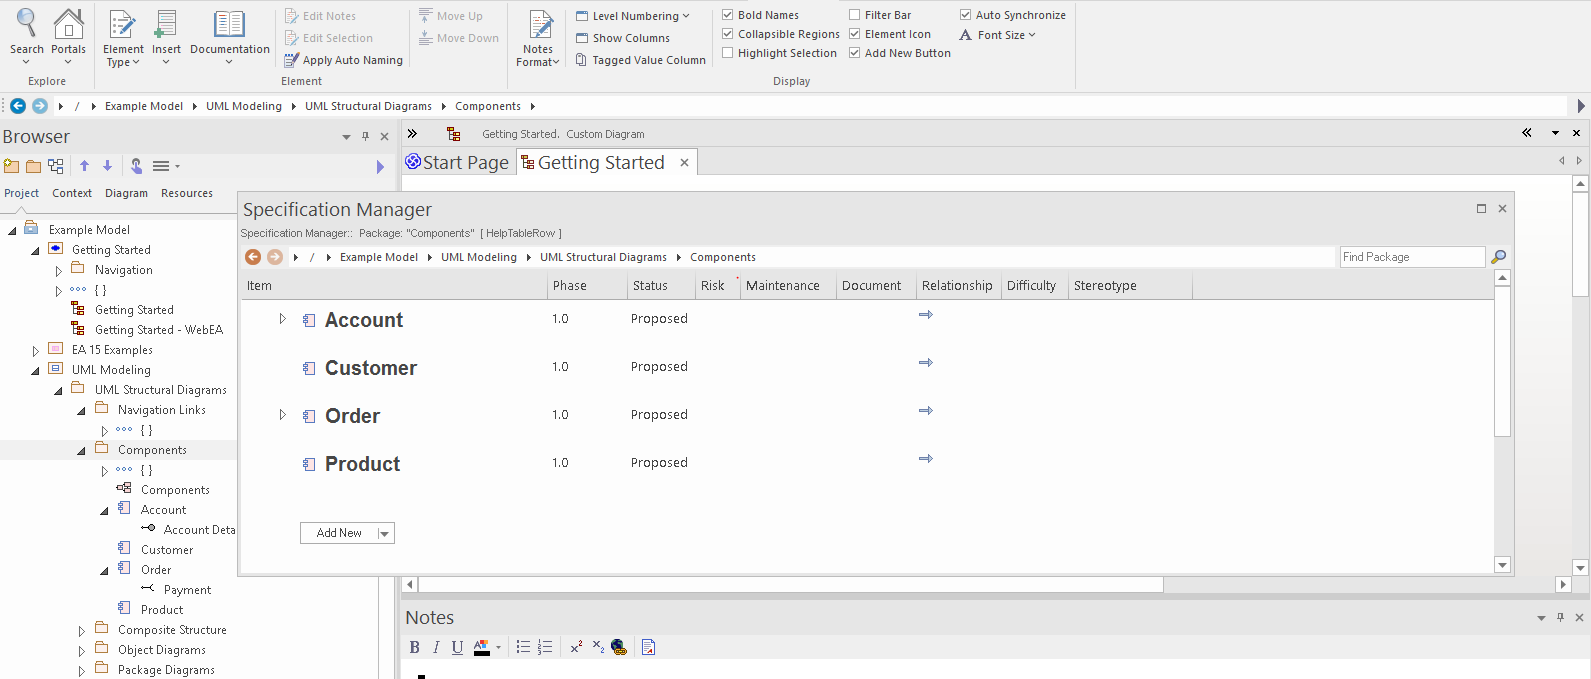 The initial (empty) view of the Specification Manager in Sparx Systems Enterprise Architect.